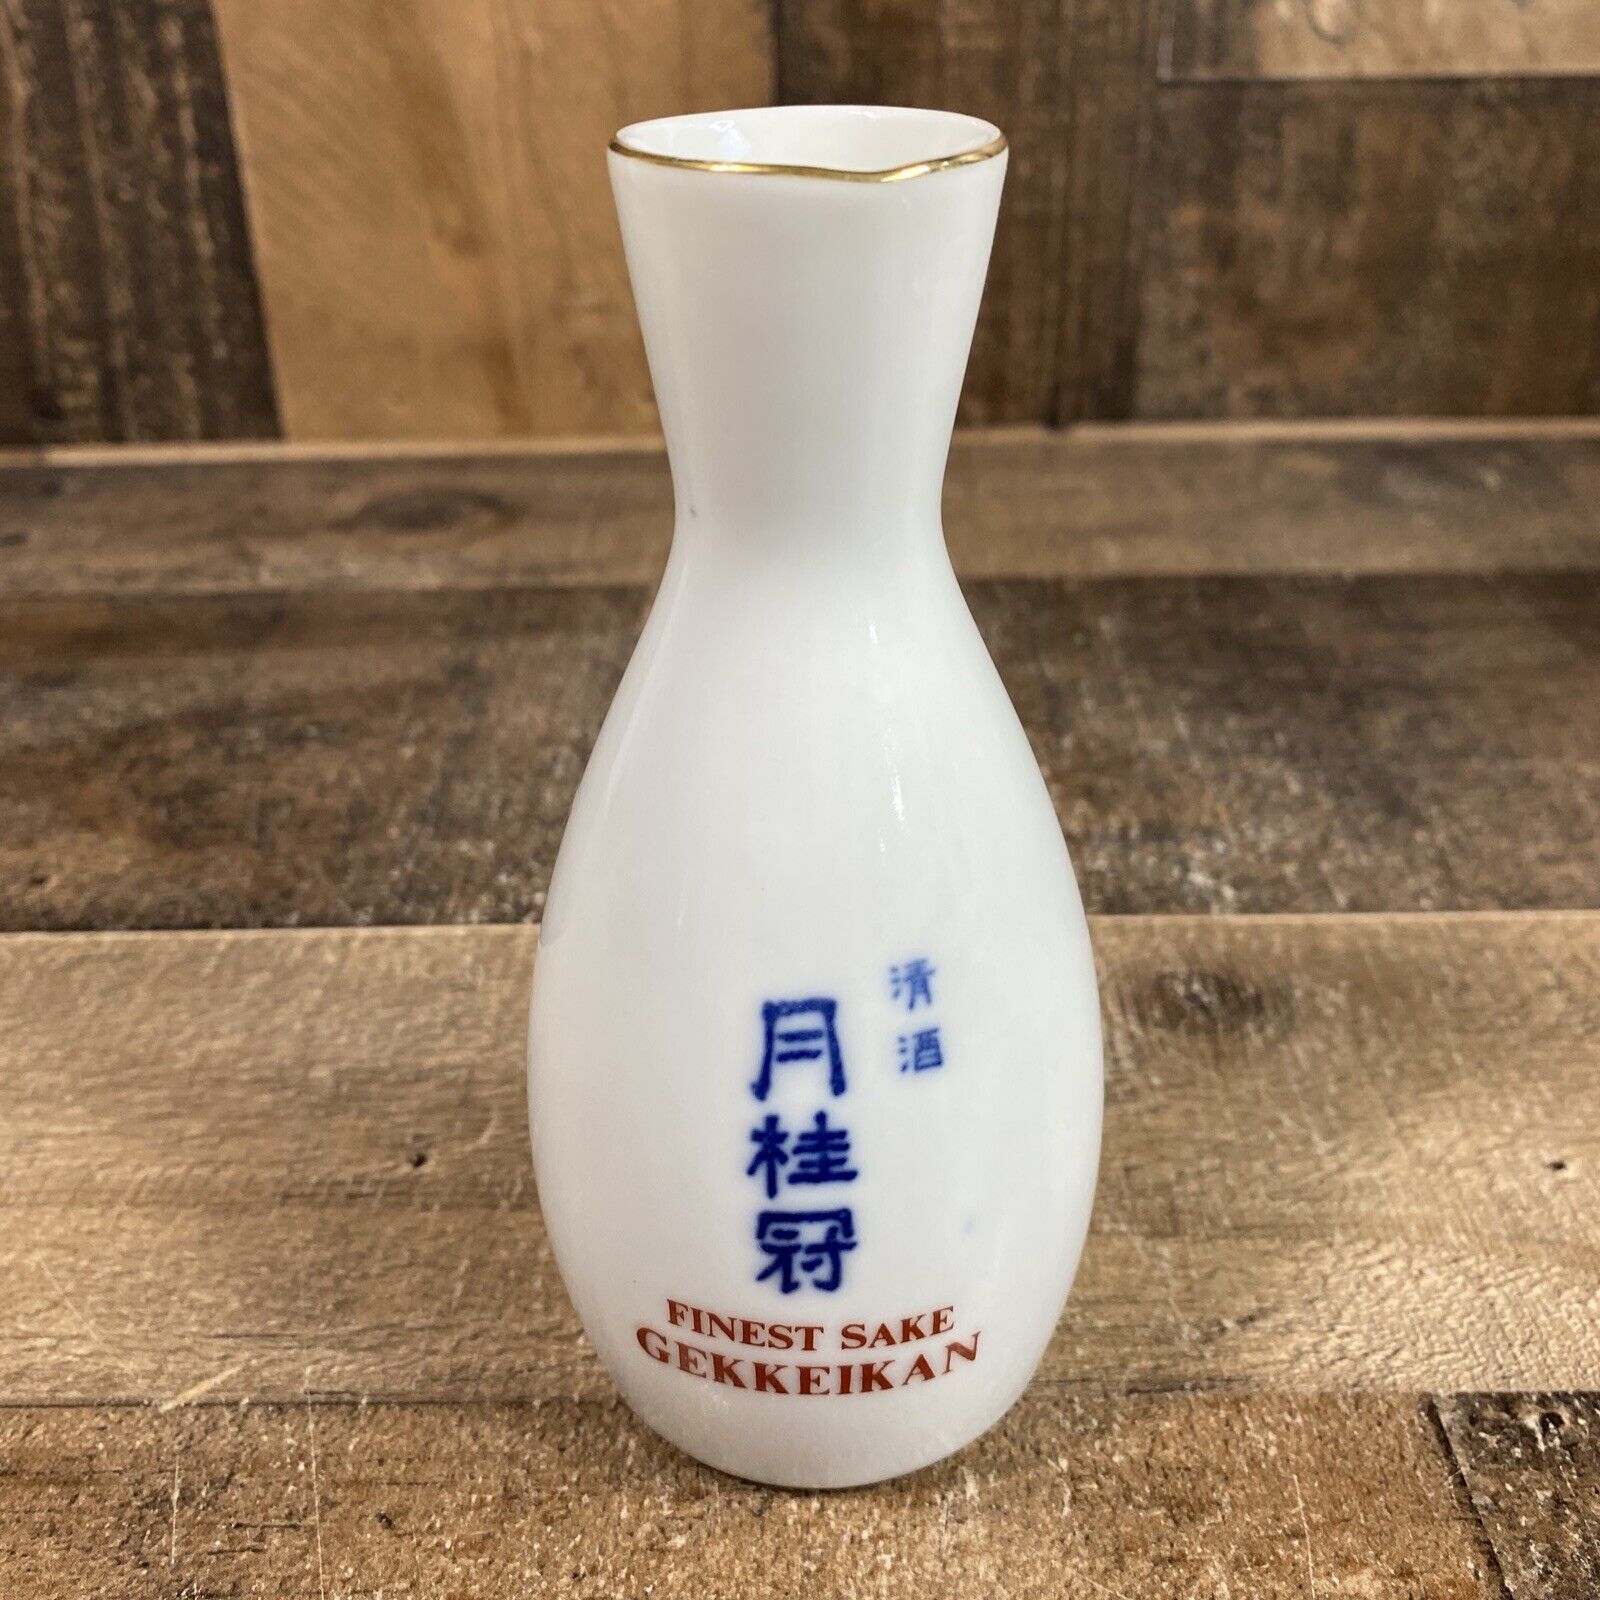 Gekkeikan The Finest Japanese Sake Bottle Vase 6 Inches Tall Made in Japan